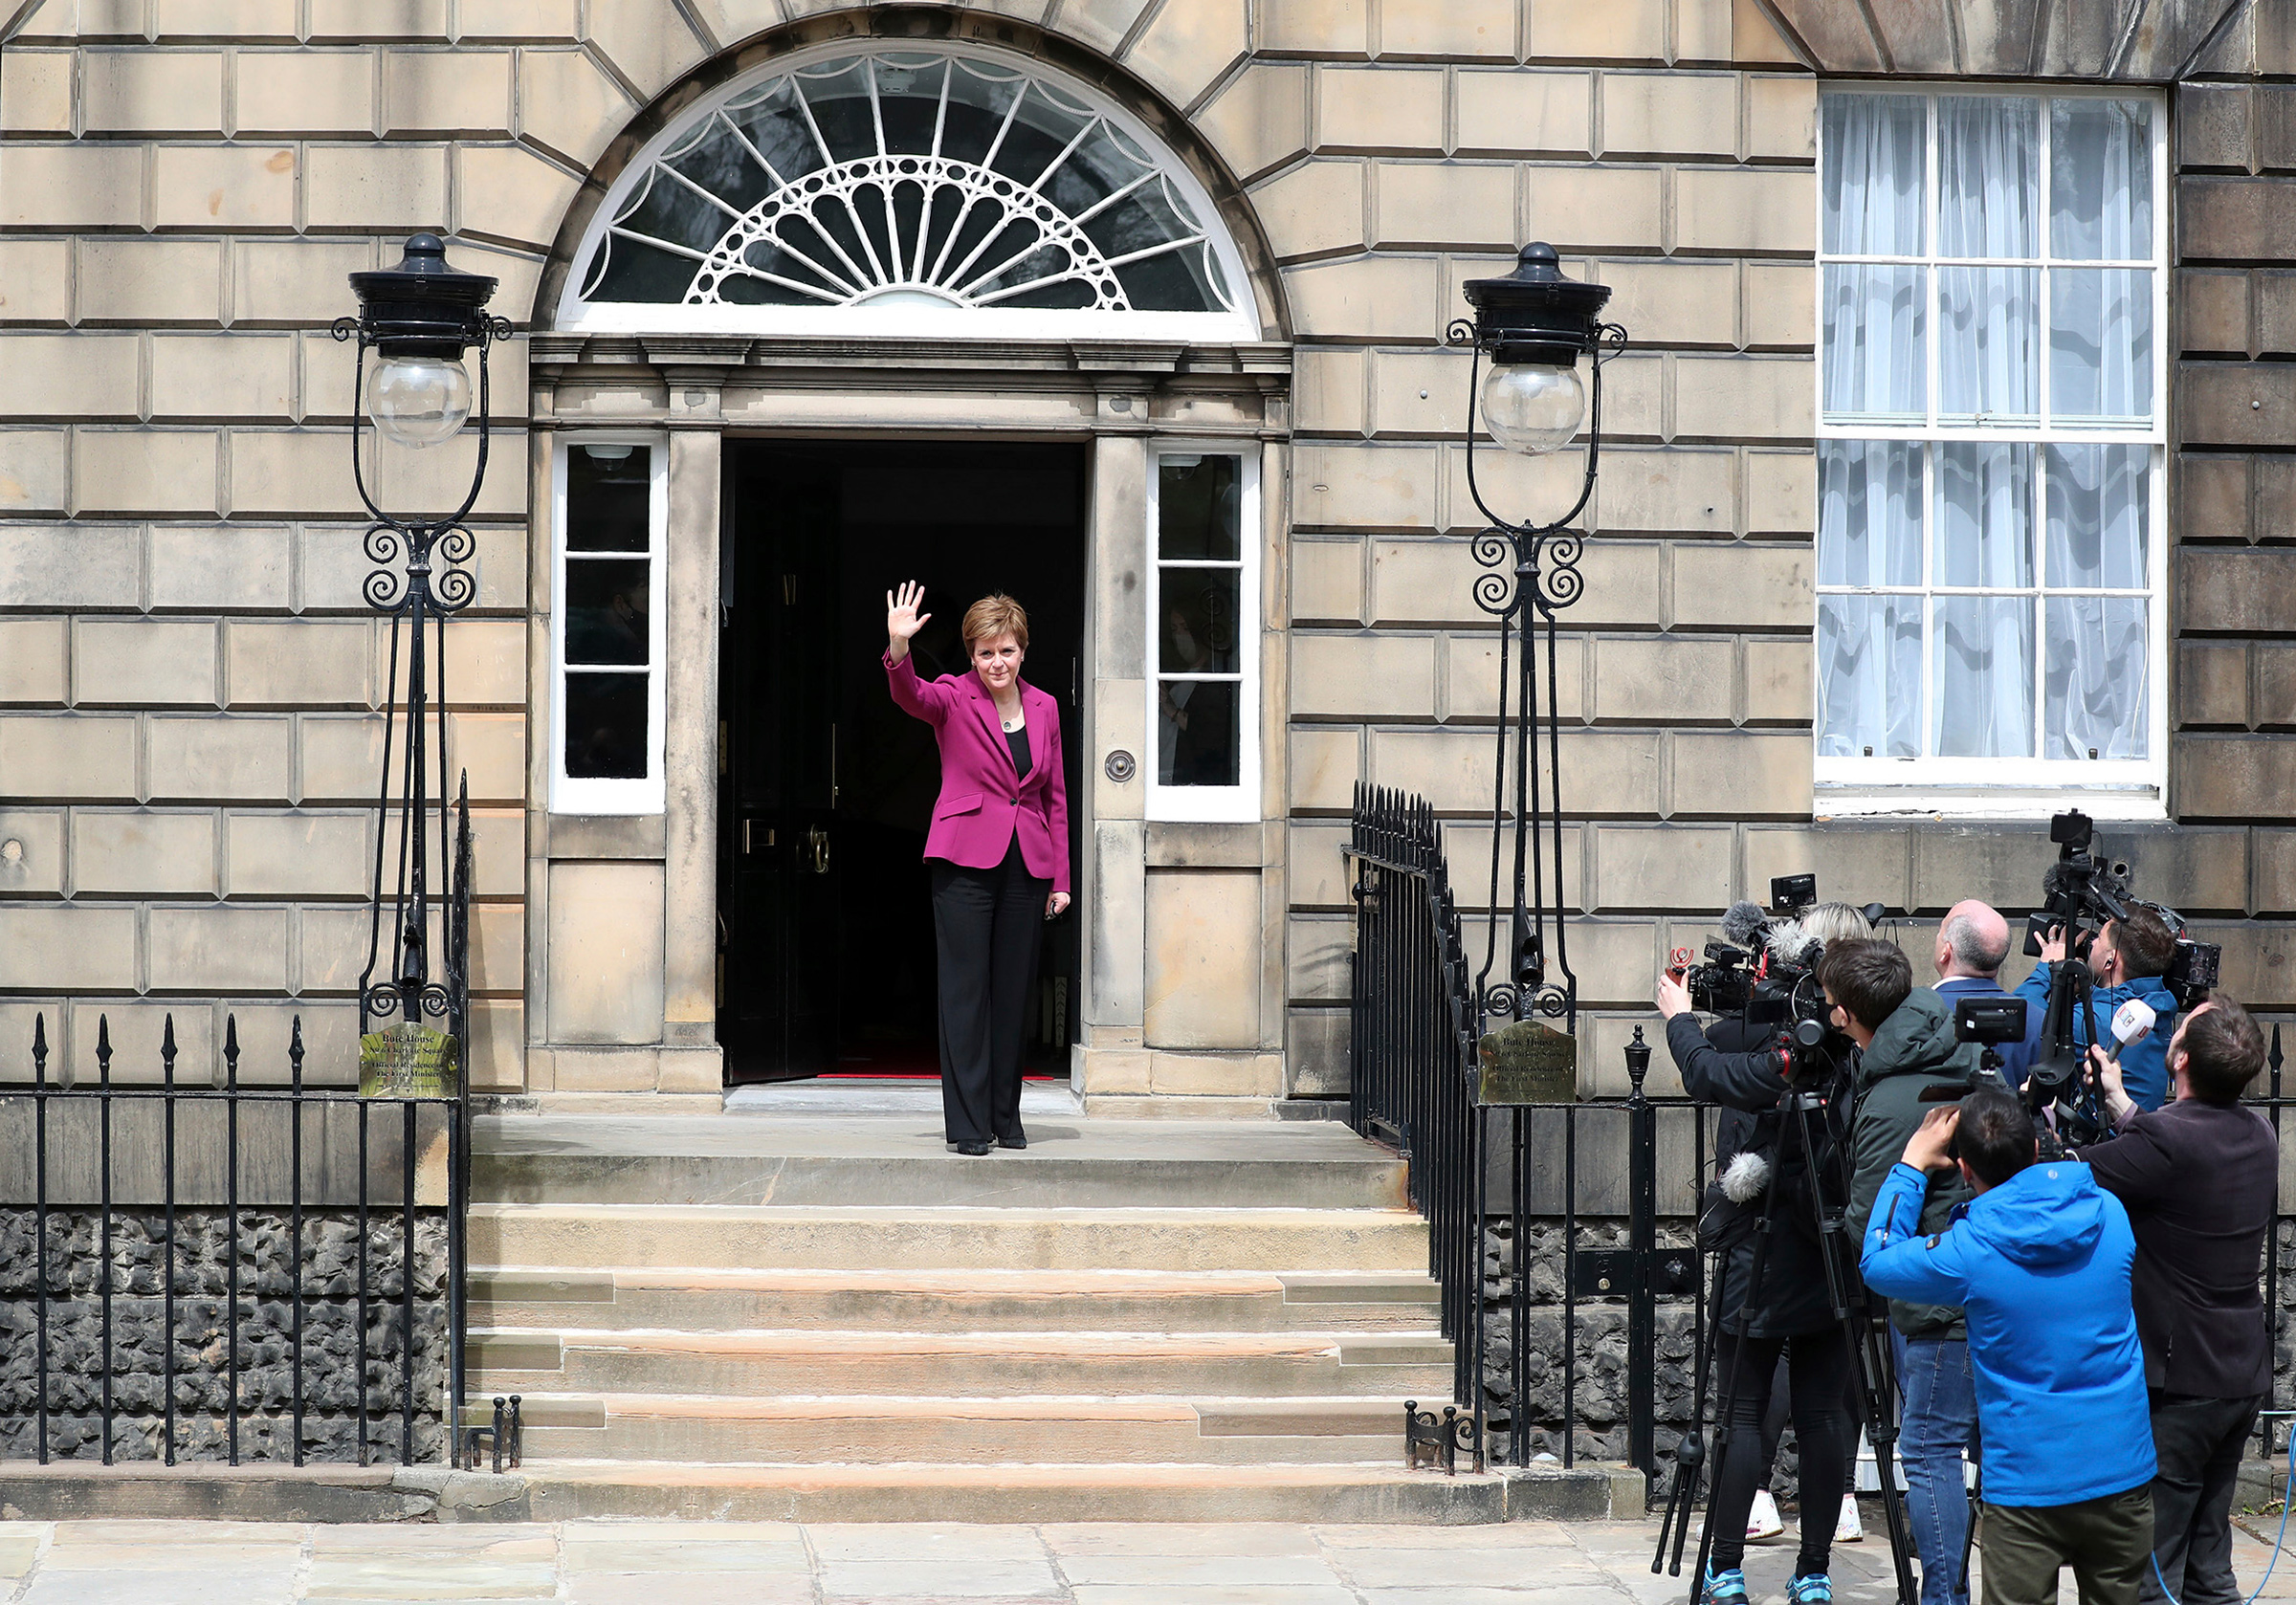 Scotland's First Minister and Scottish National Party leader Nicola Sturgeon poses for photographers at Bute House in Edinburgh on May 9. Sturgeon said the election results proved a second independence vote for Scotland was “the will of the country."